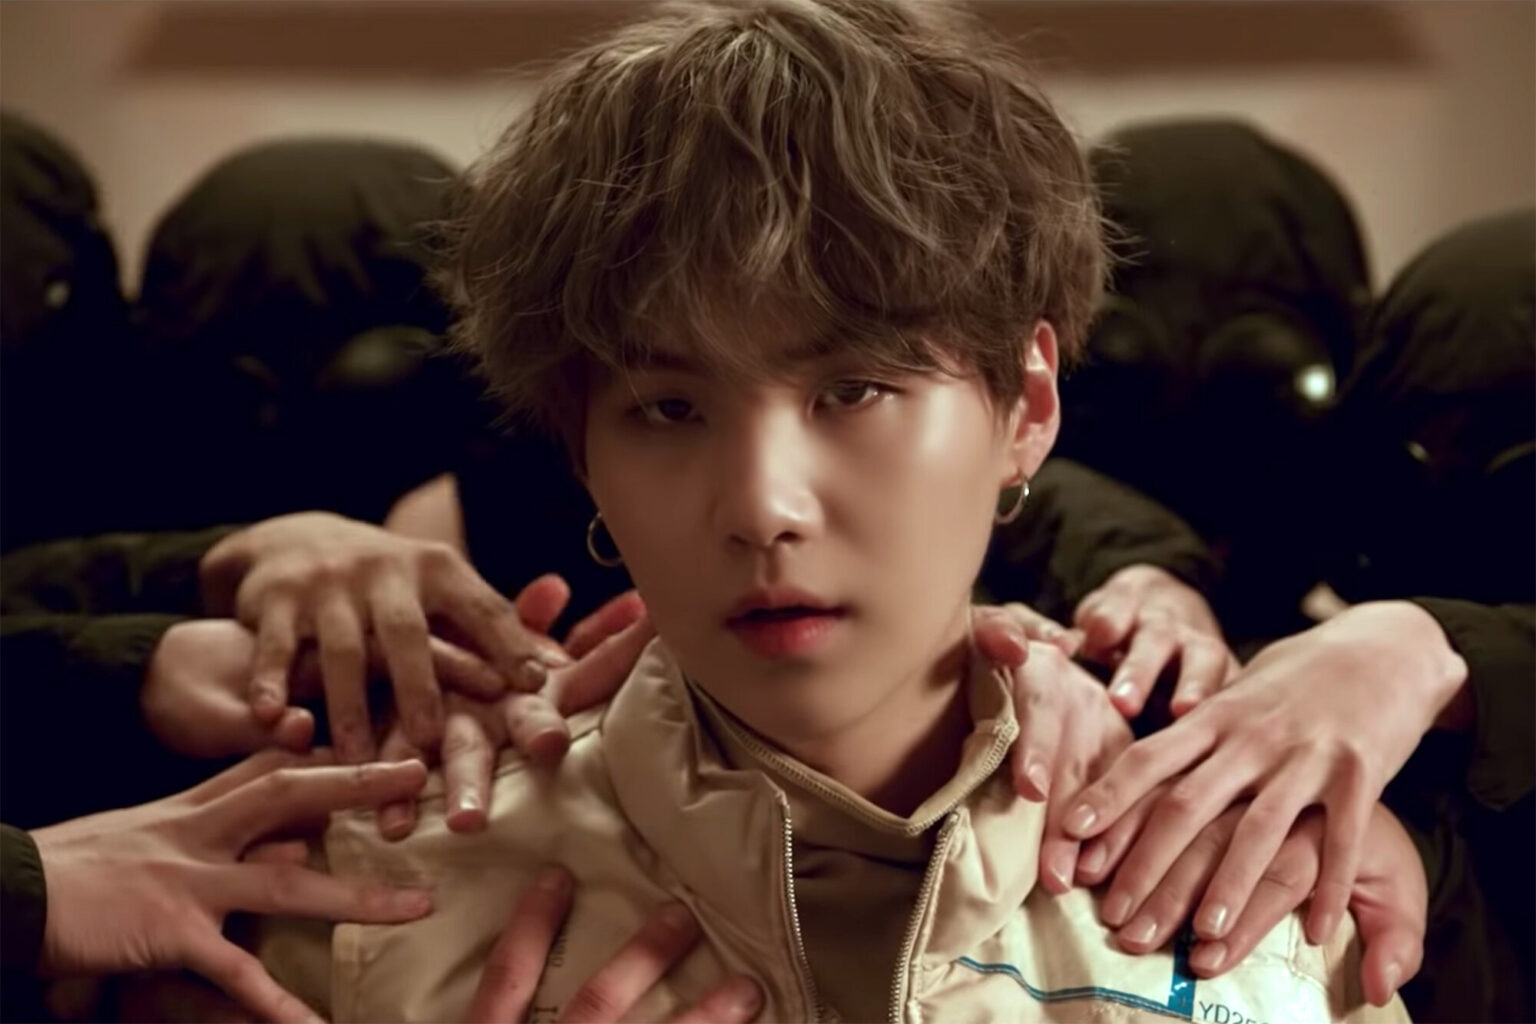 How hard do you stan Suga from BTS? Check out the best rhymes written by Suga and see who he collaborated with.